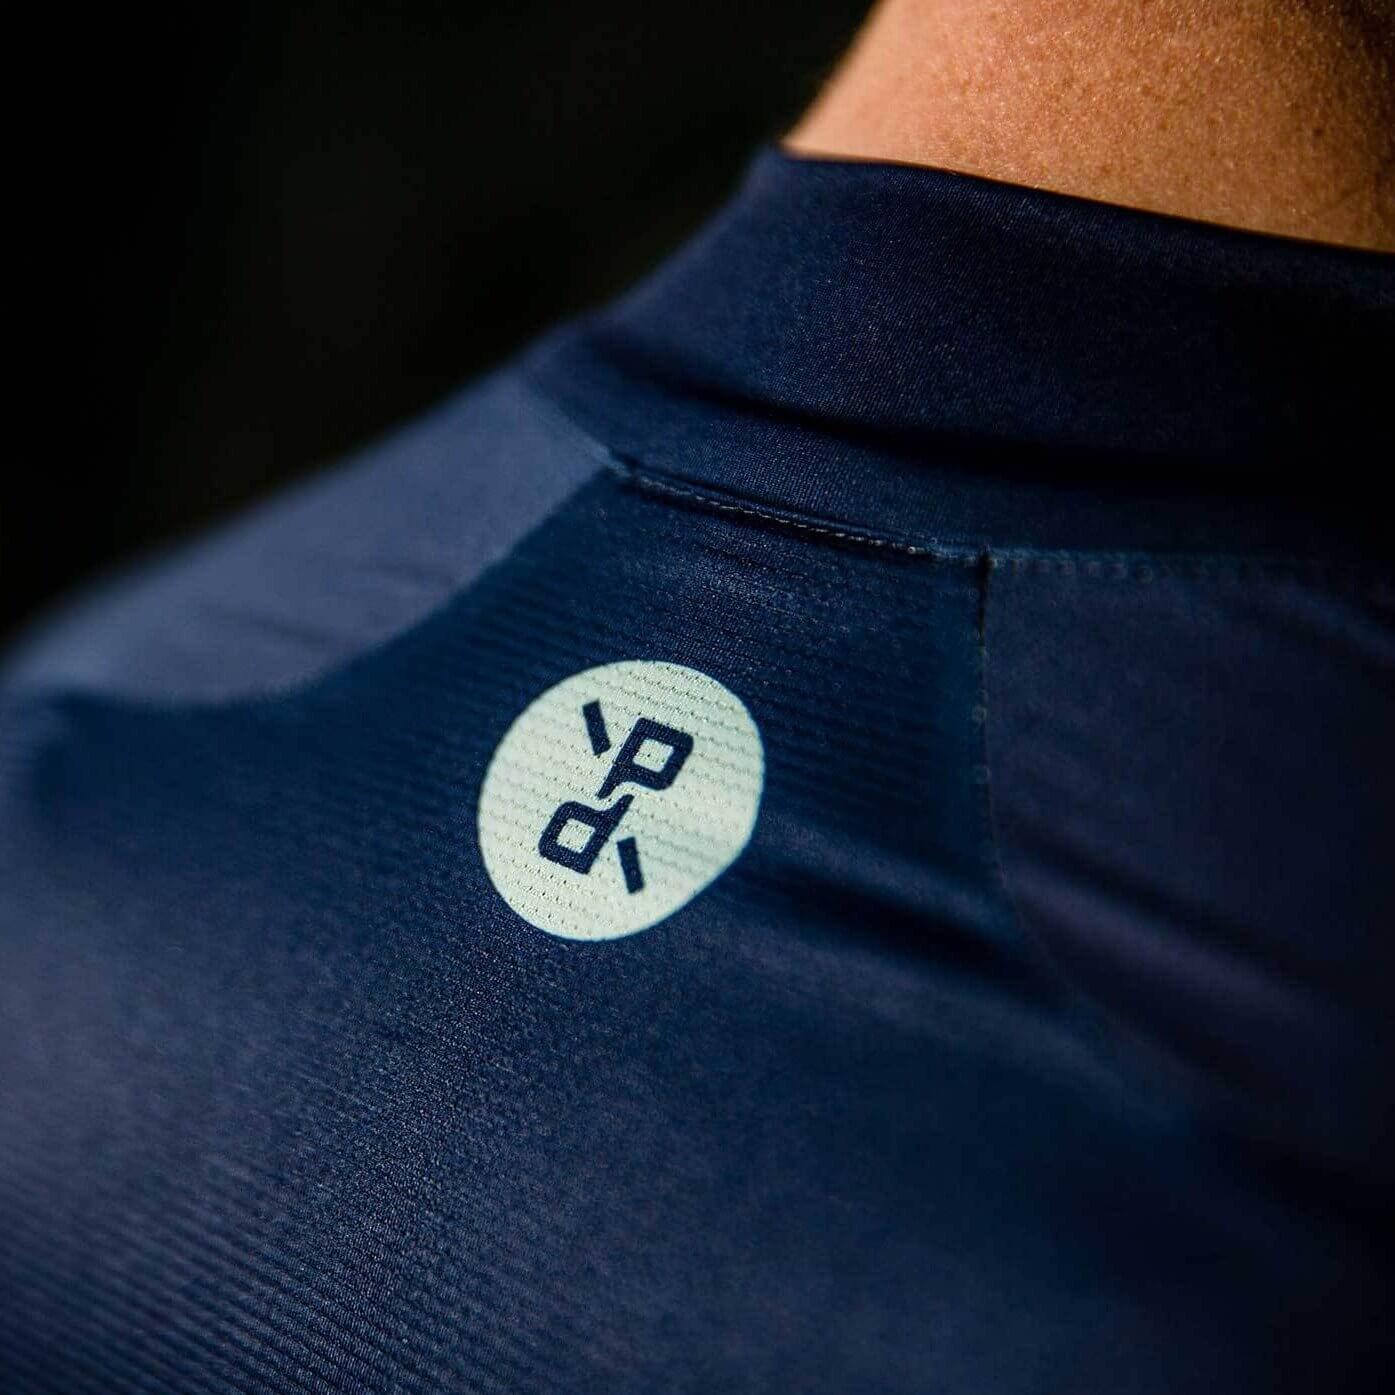 Recon Jersey - Navy